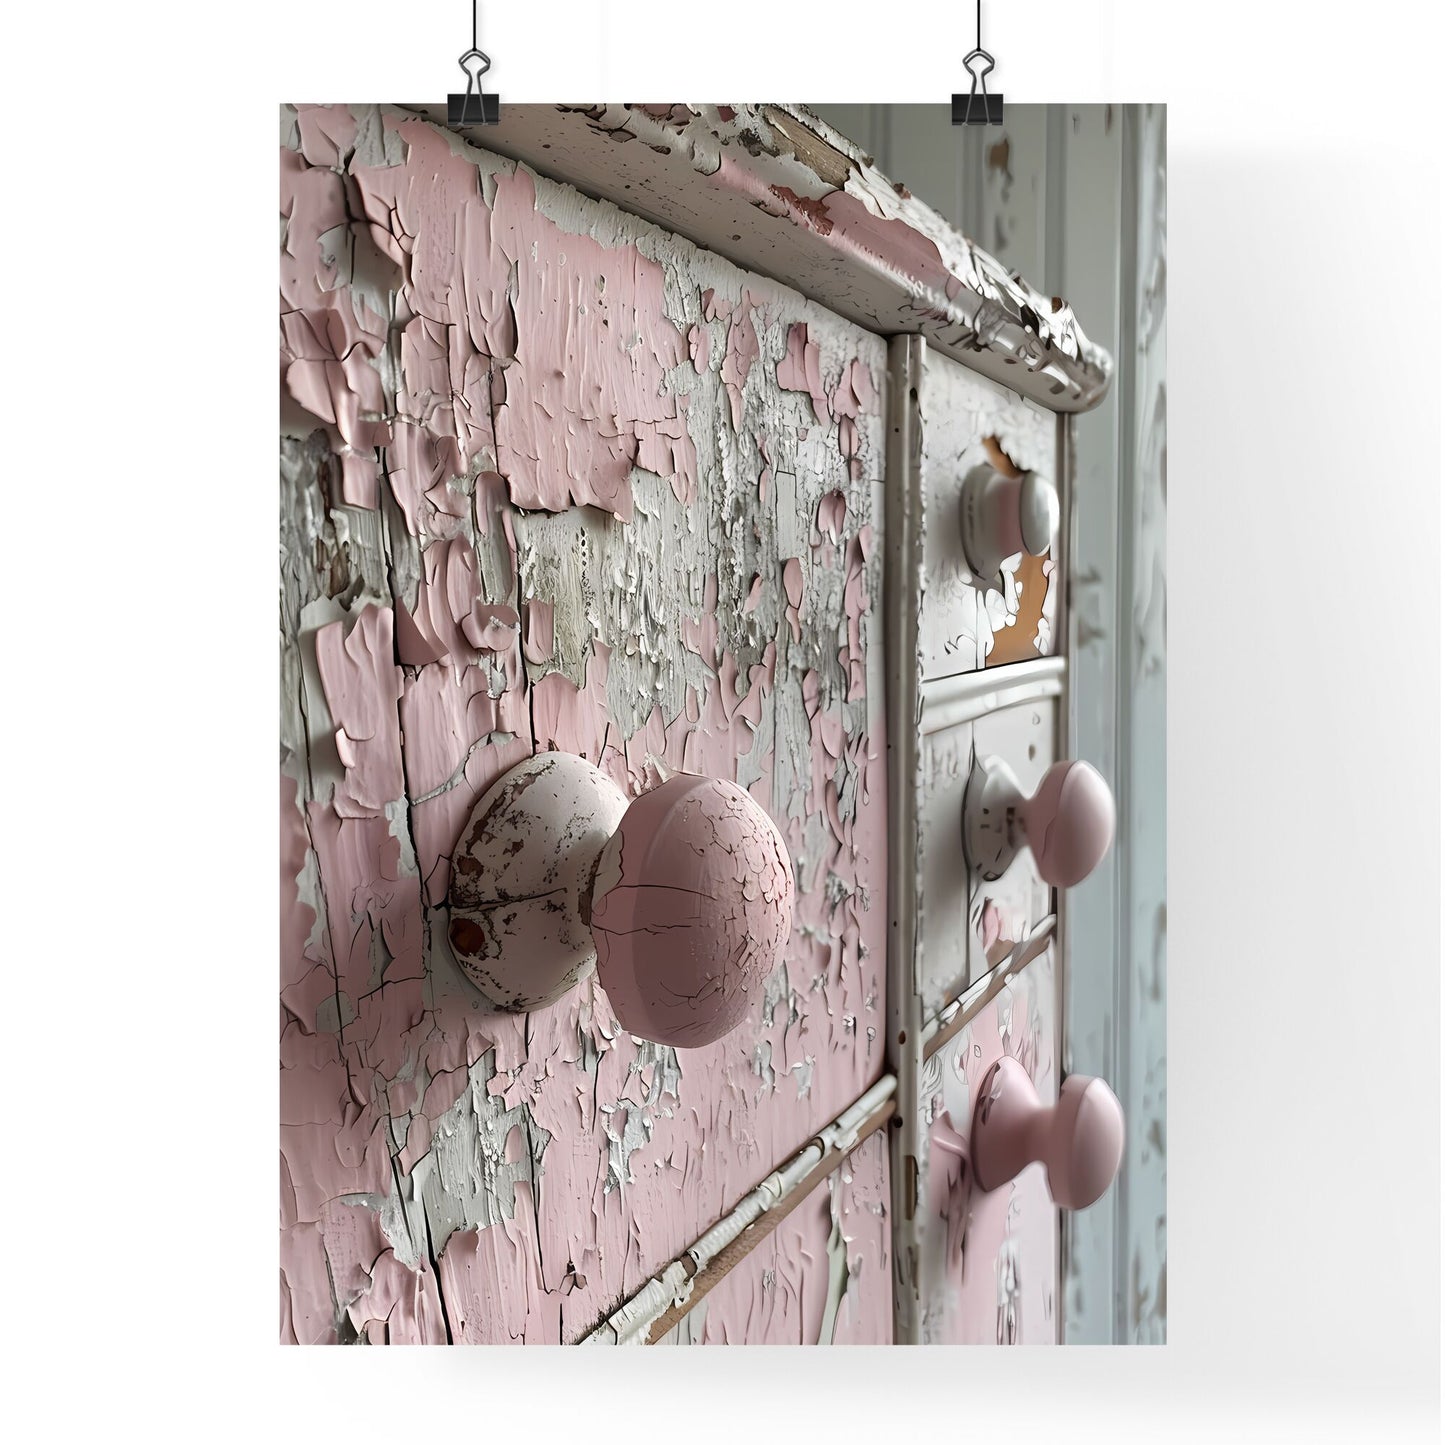 Vintage Inspired Shabby Chic Bathroom Cabinet with Painted Details, Distressed Materials and Neutral Tones, Close-Up of Dresser with Vibrant Painting, Minimalistic Composition, Soft Lighting Default Title